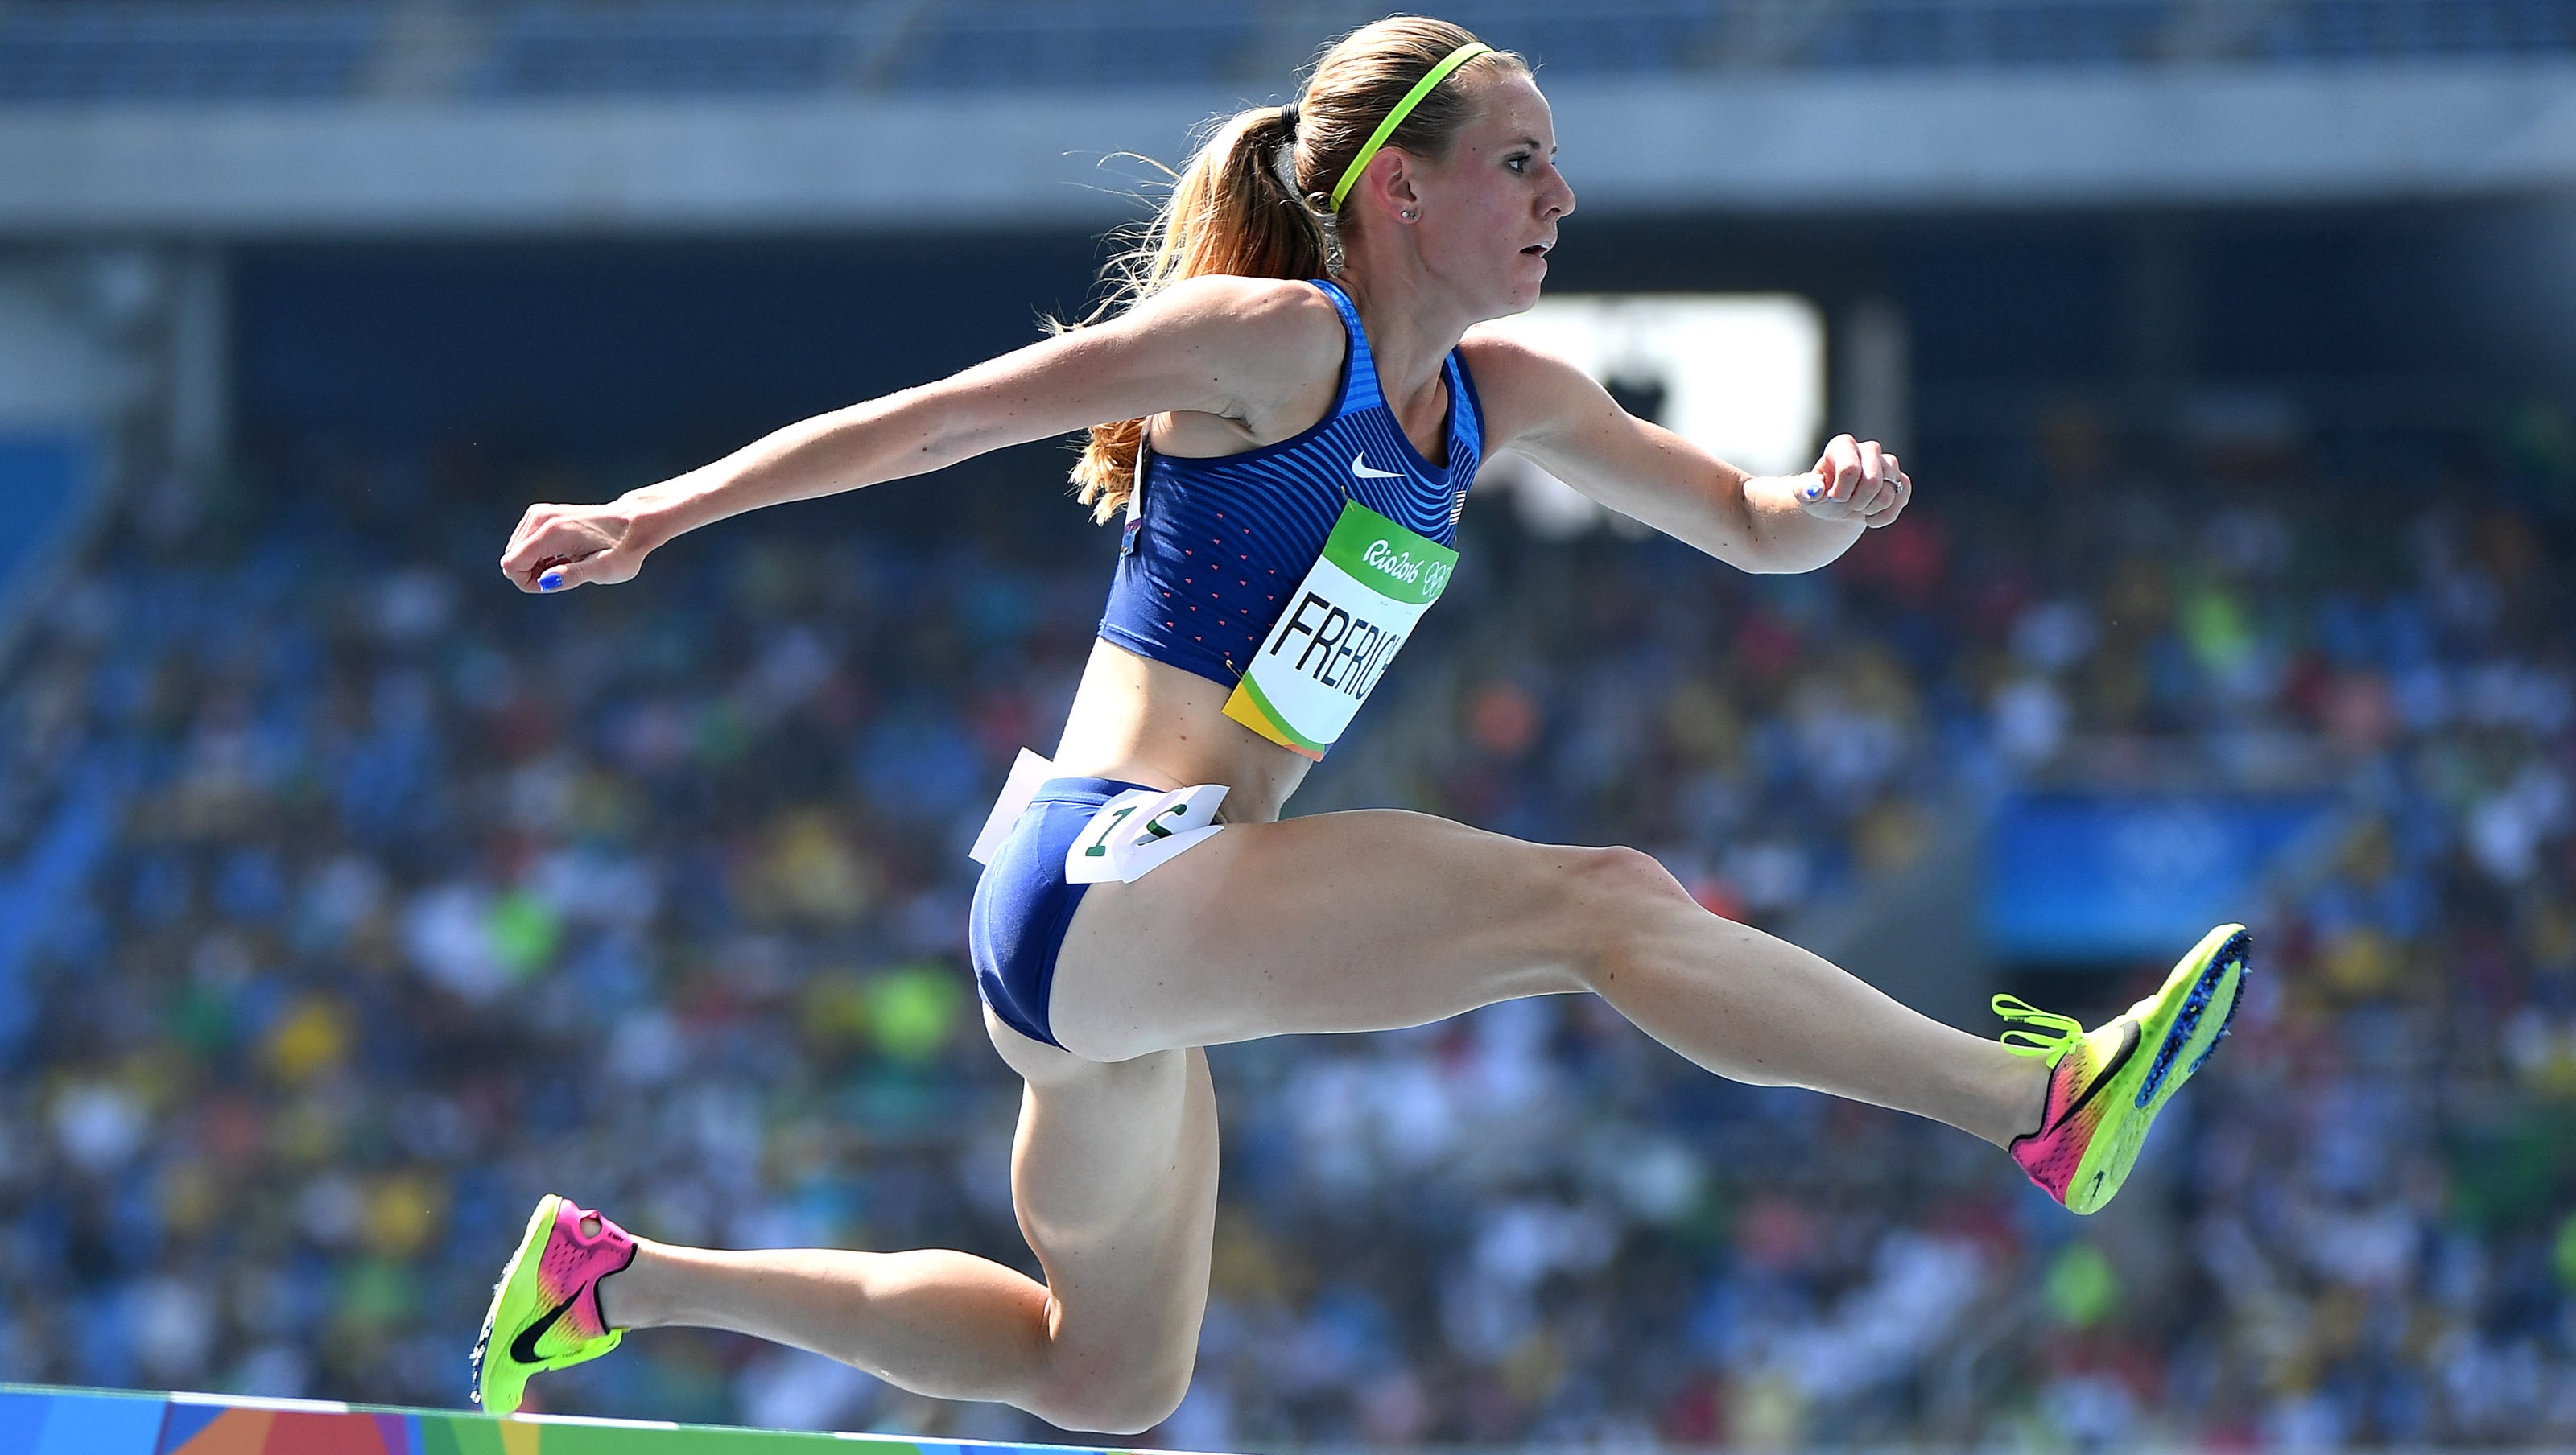 Nixas Courtney Frerichs Finishes 11th In Olympic Steeplechase Finals 